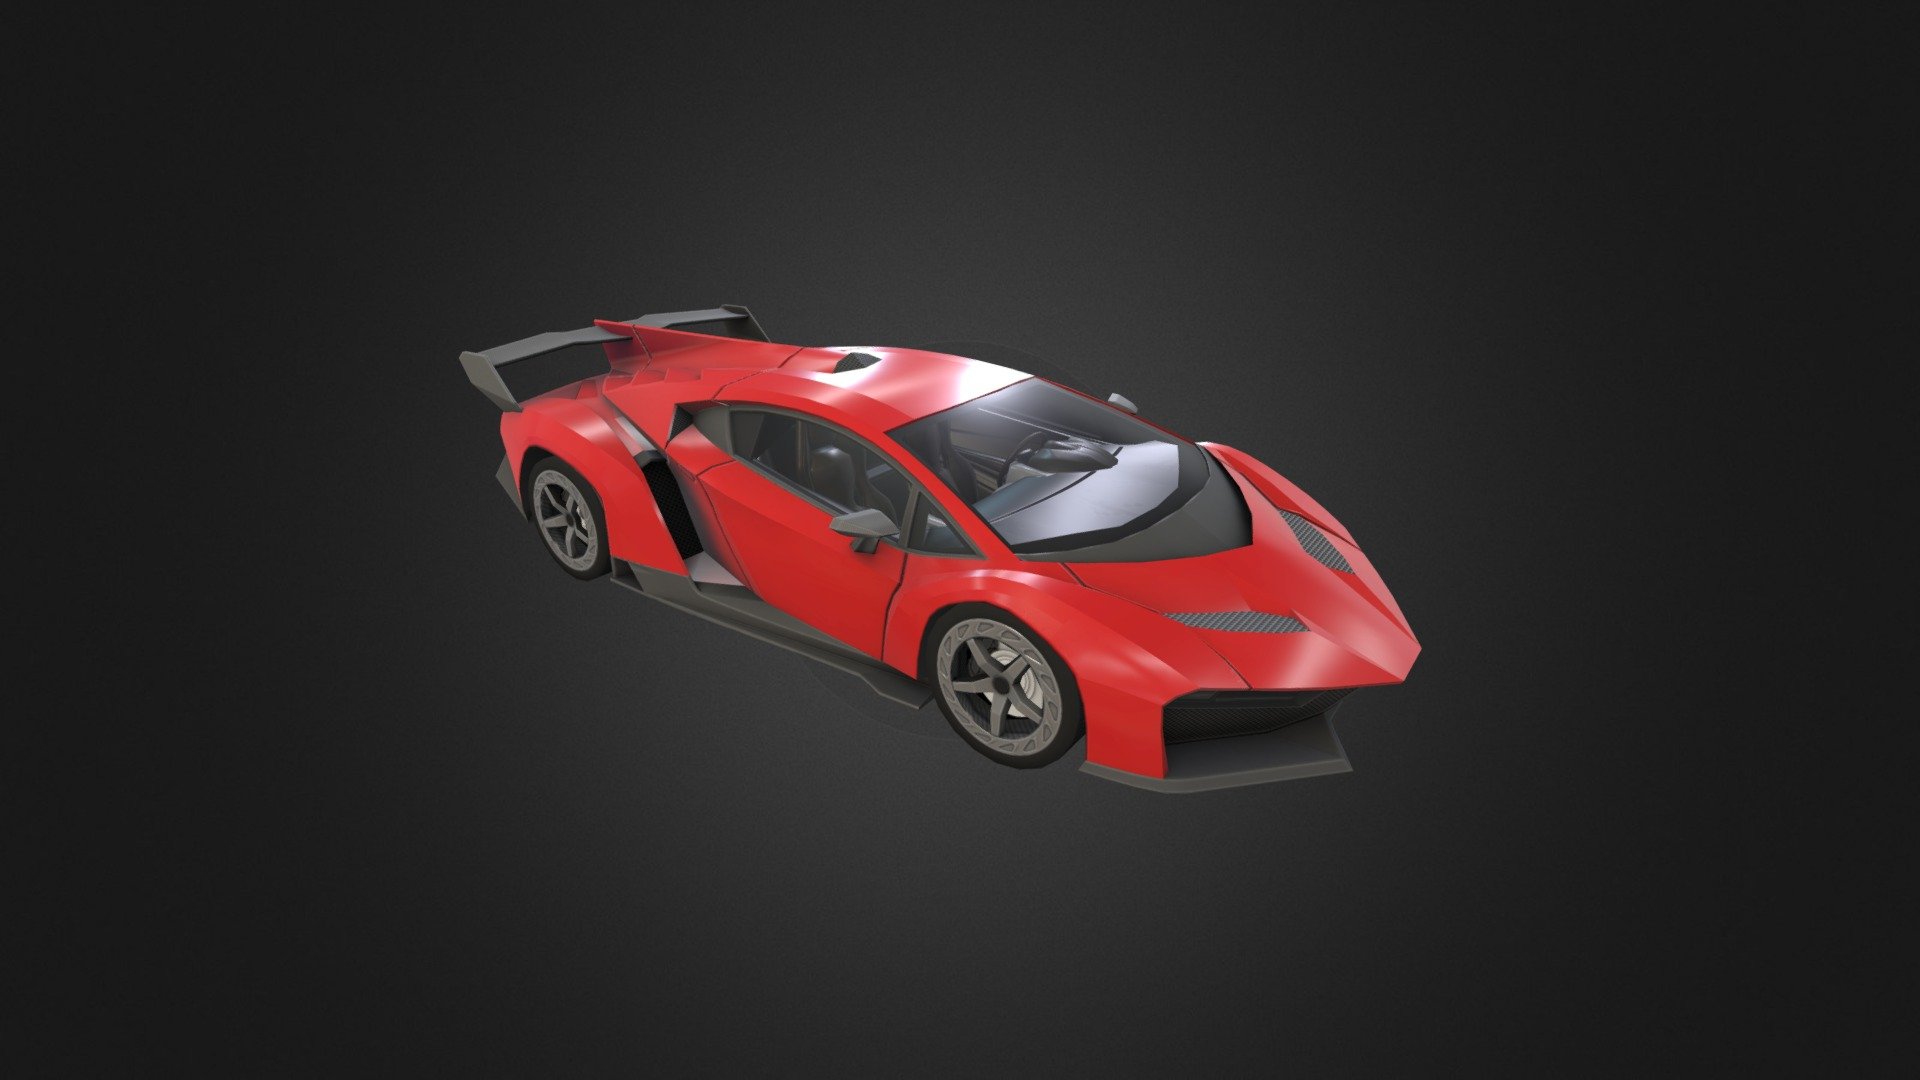 A low poly amazing race car that can be used for any type of projects. Model has detailed realistic textures 1024x1024 and 2048x2048. Includes diffuse, normal and specular mapped.
Suitable for mobile applications and greatly optimized 3d model